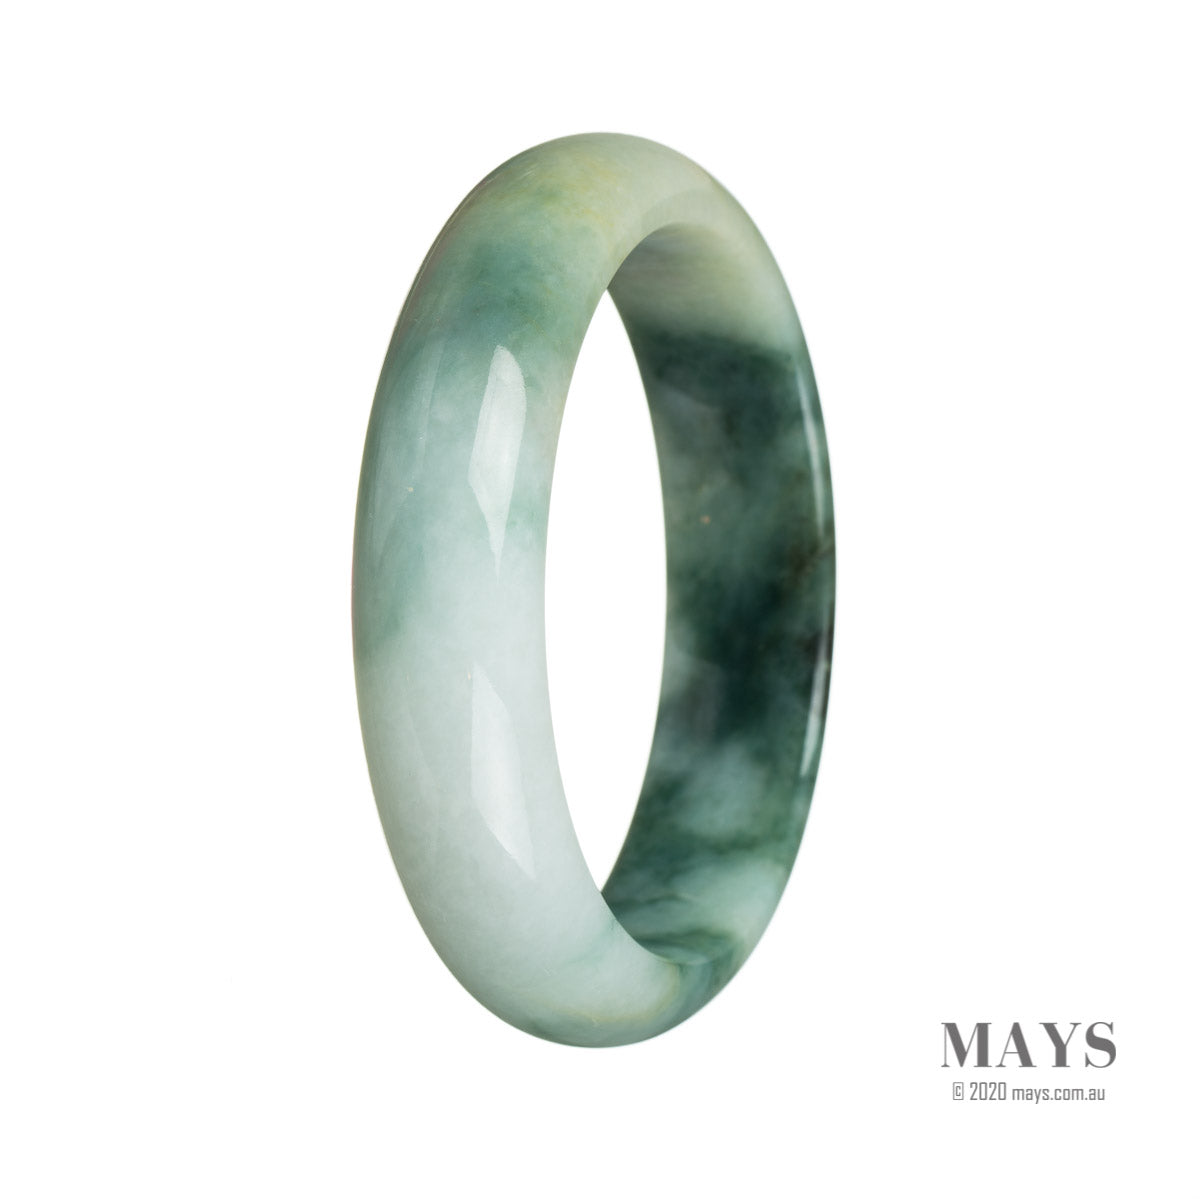 A close-up image of an authentic Type A Green flower Jadeite bangle bracelet. The bangle has a half moon shape and measures 59mm in diameter. This beautiful piece is from the MAYS™ collection.